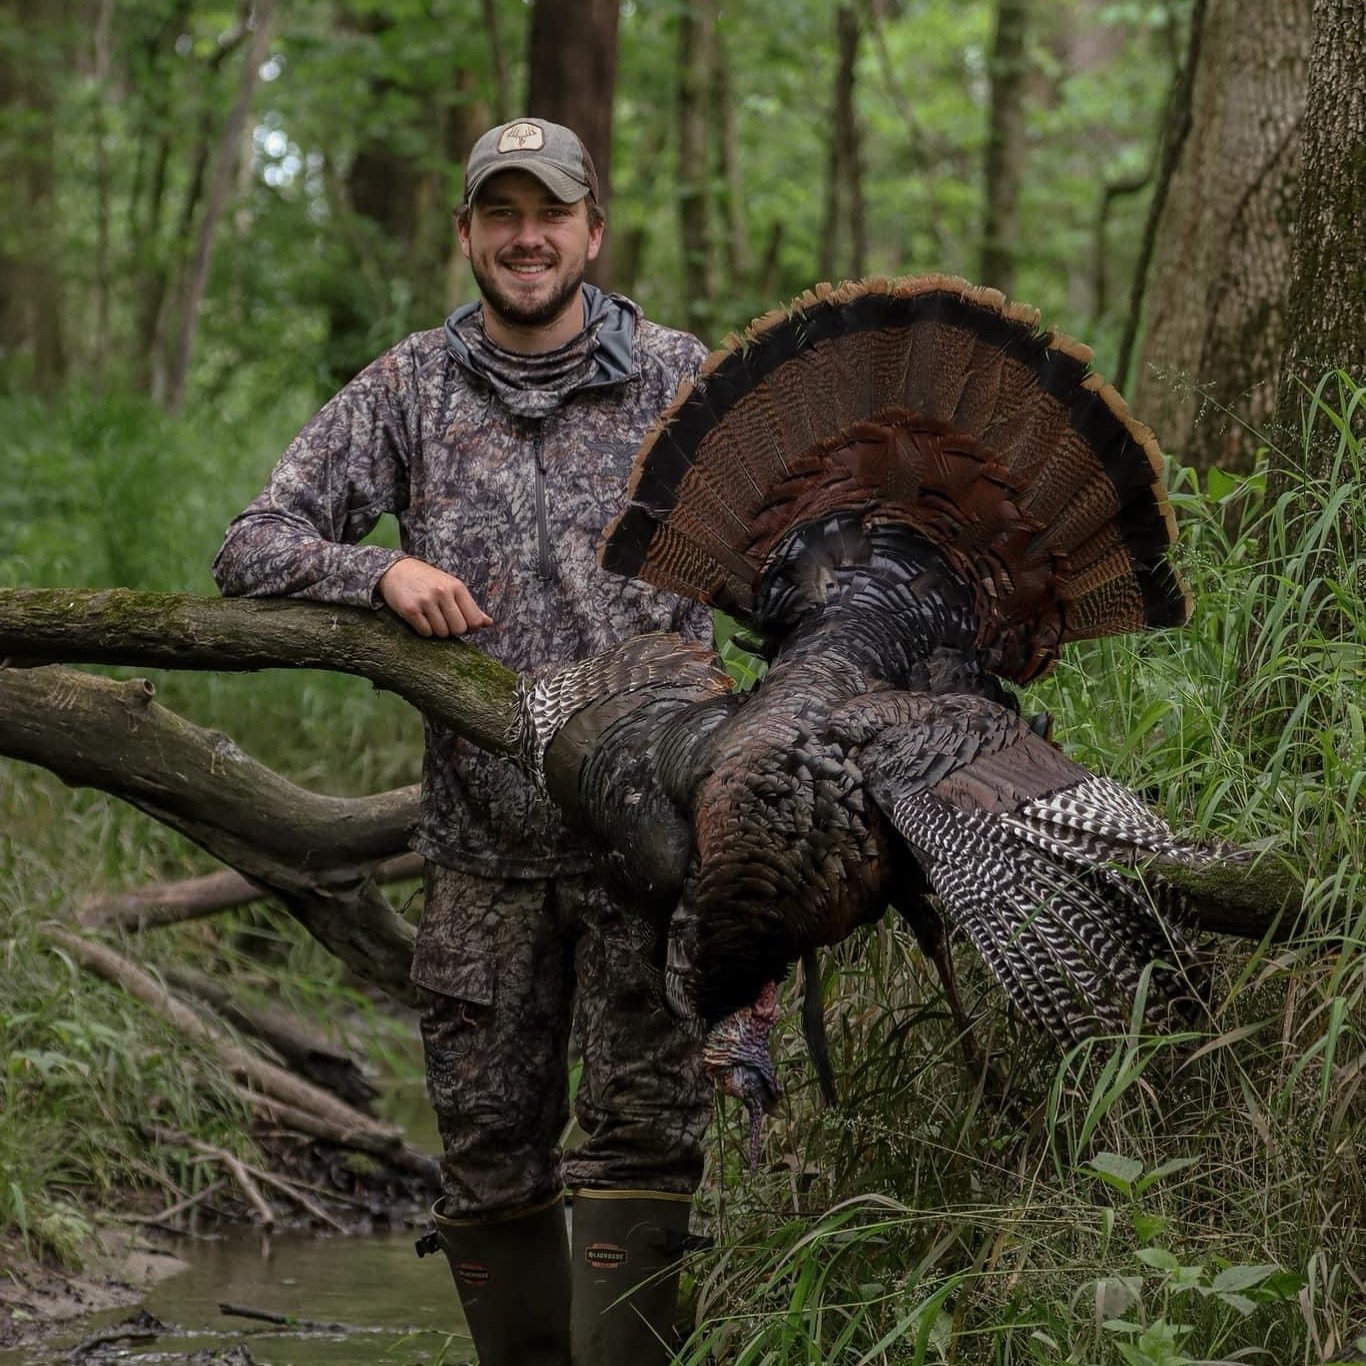 @reece_waddington was finally able to seal the deal yesterday on the last day of Illinois 4th season! These birds ran him through the wringer hunting every day but one rain day during his season! He finally figured out what the ticket to success was 